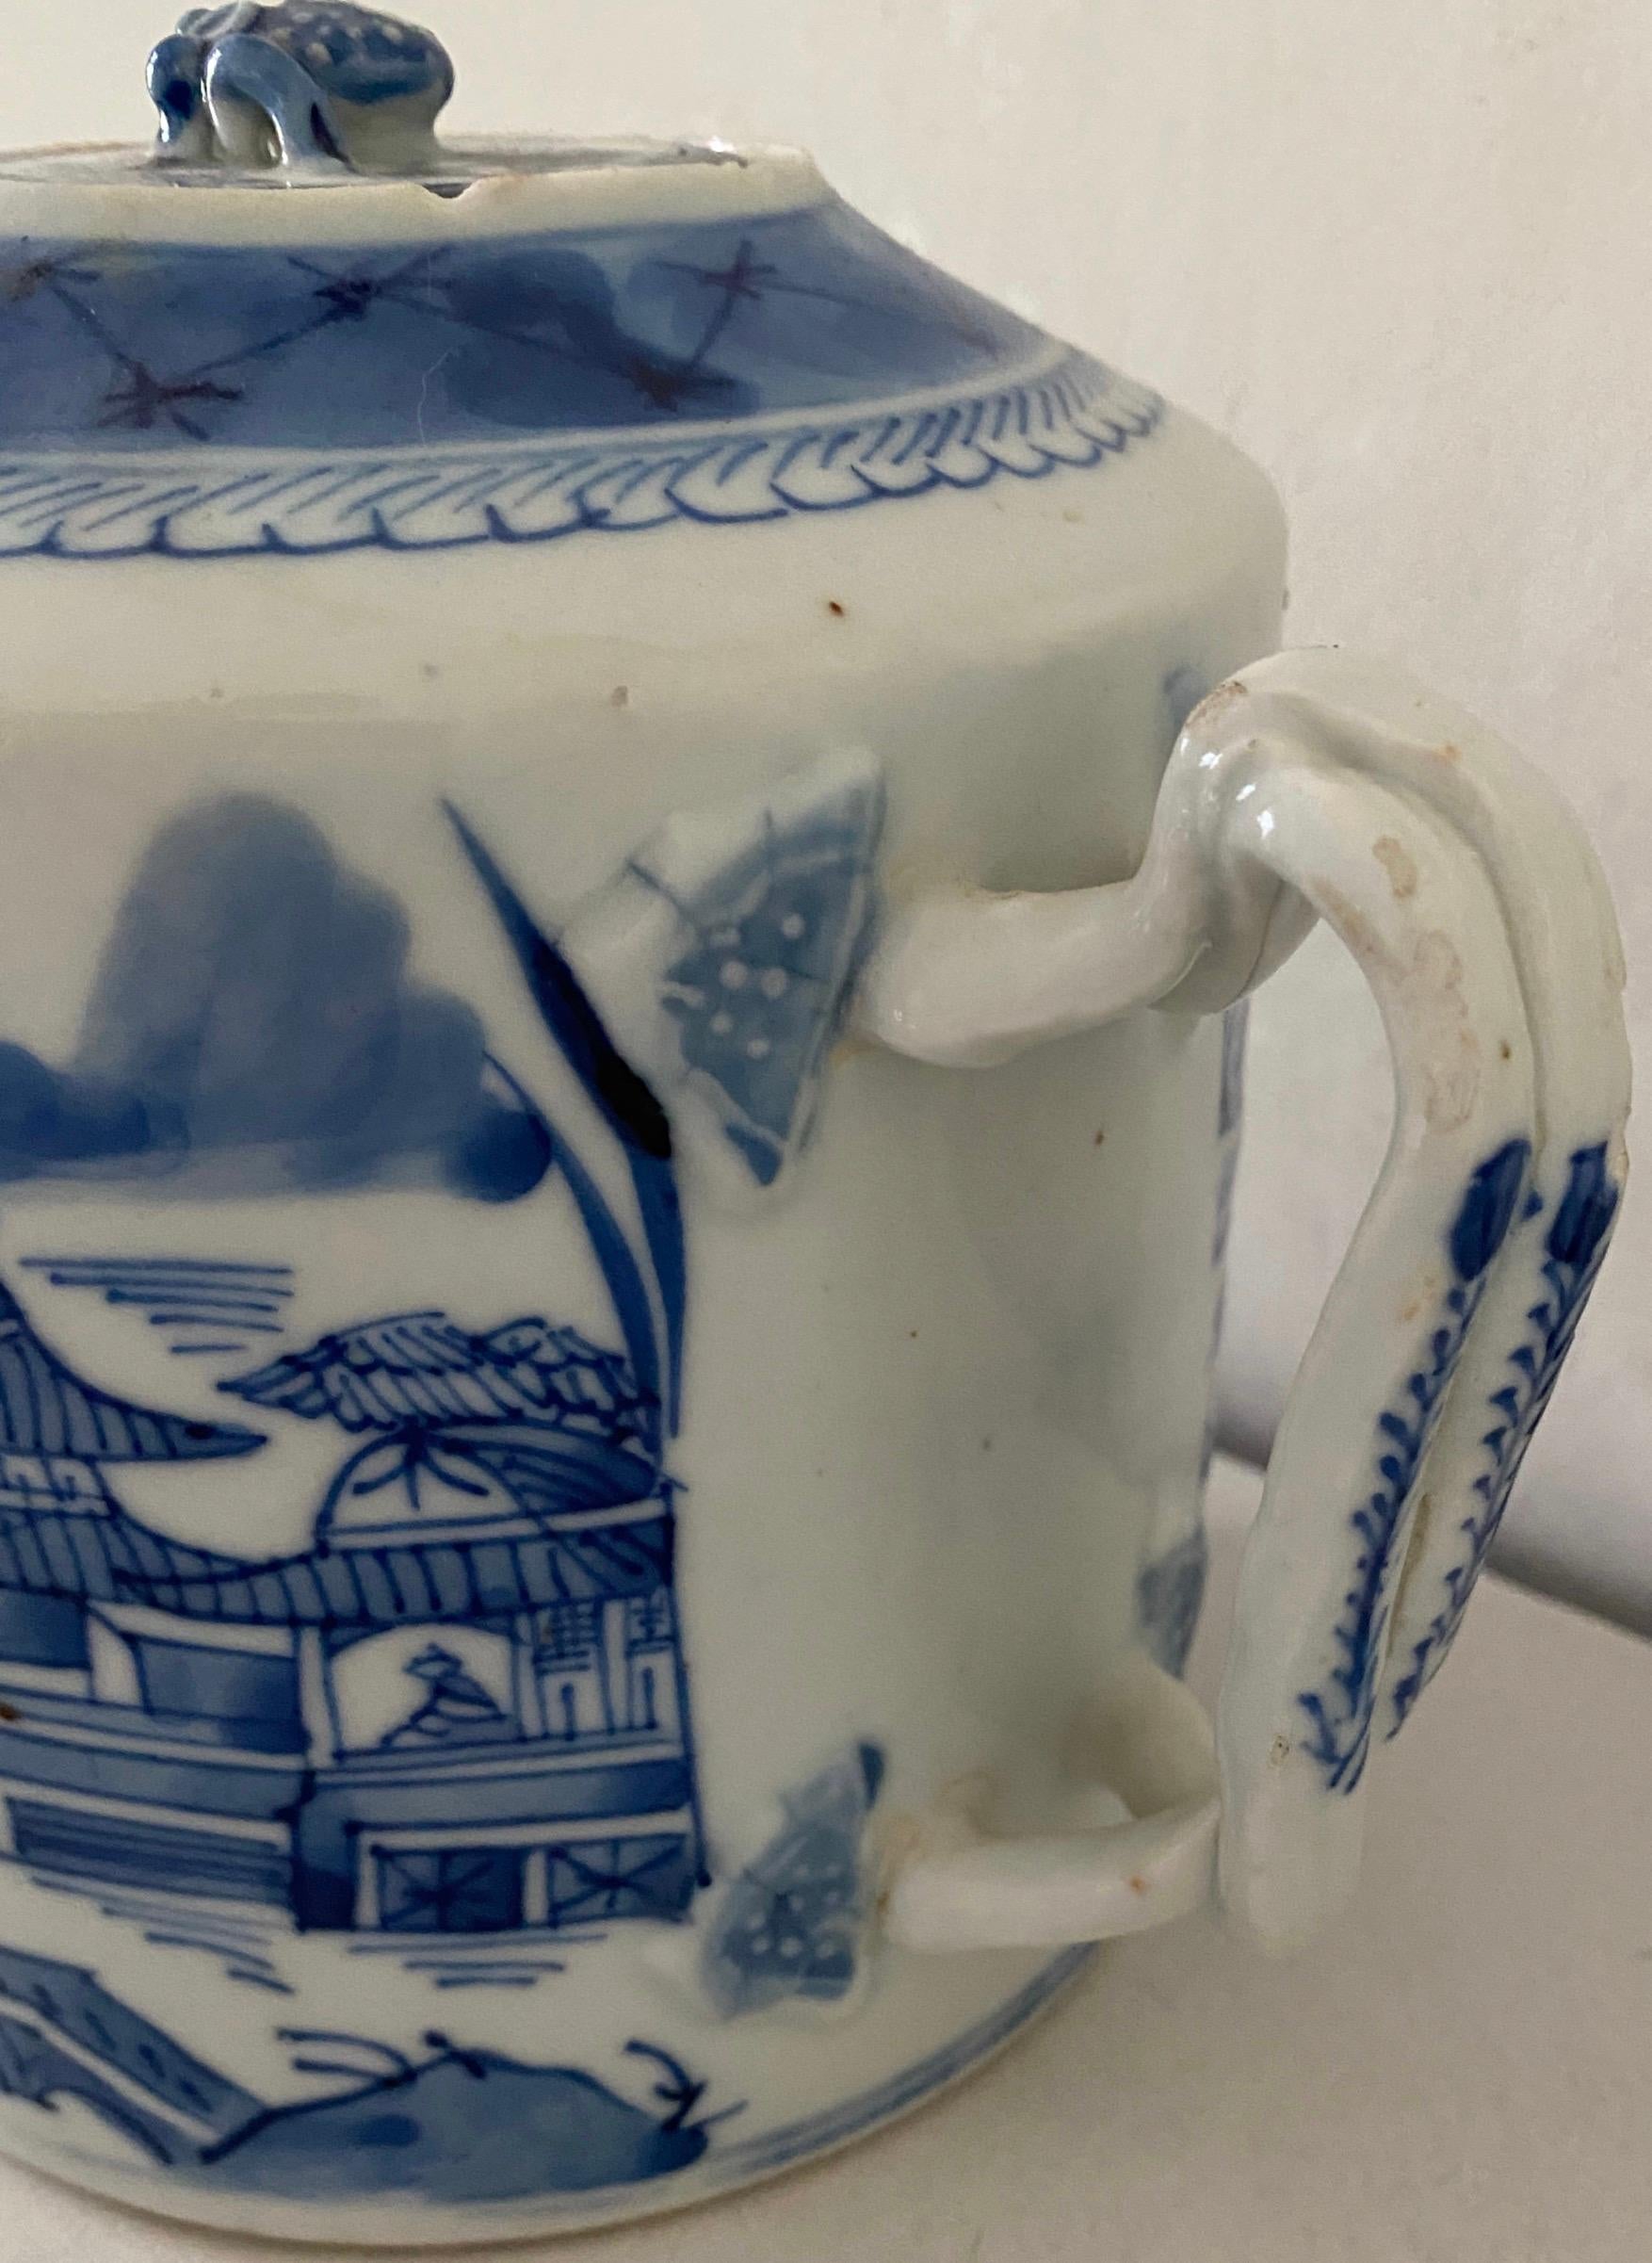 The antique fine bone porcelain blue and white Chinese teapot has a long spout with hand painted scenic design. Enjoy a cup of tea served in this antique Chinese teapot and savor the fine flavor of your tea. A worthy piece to add to your blue and